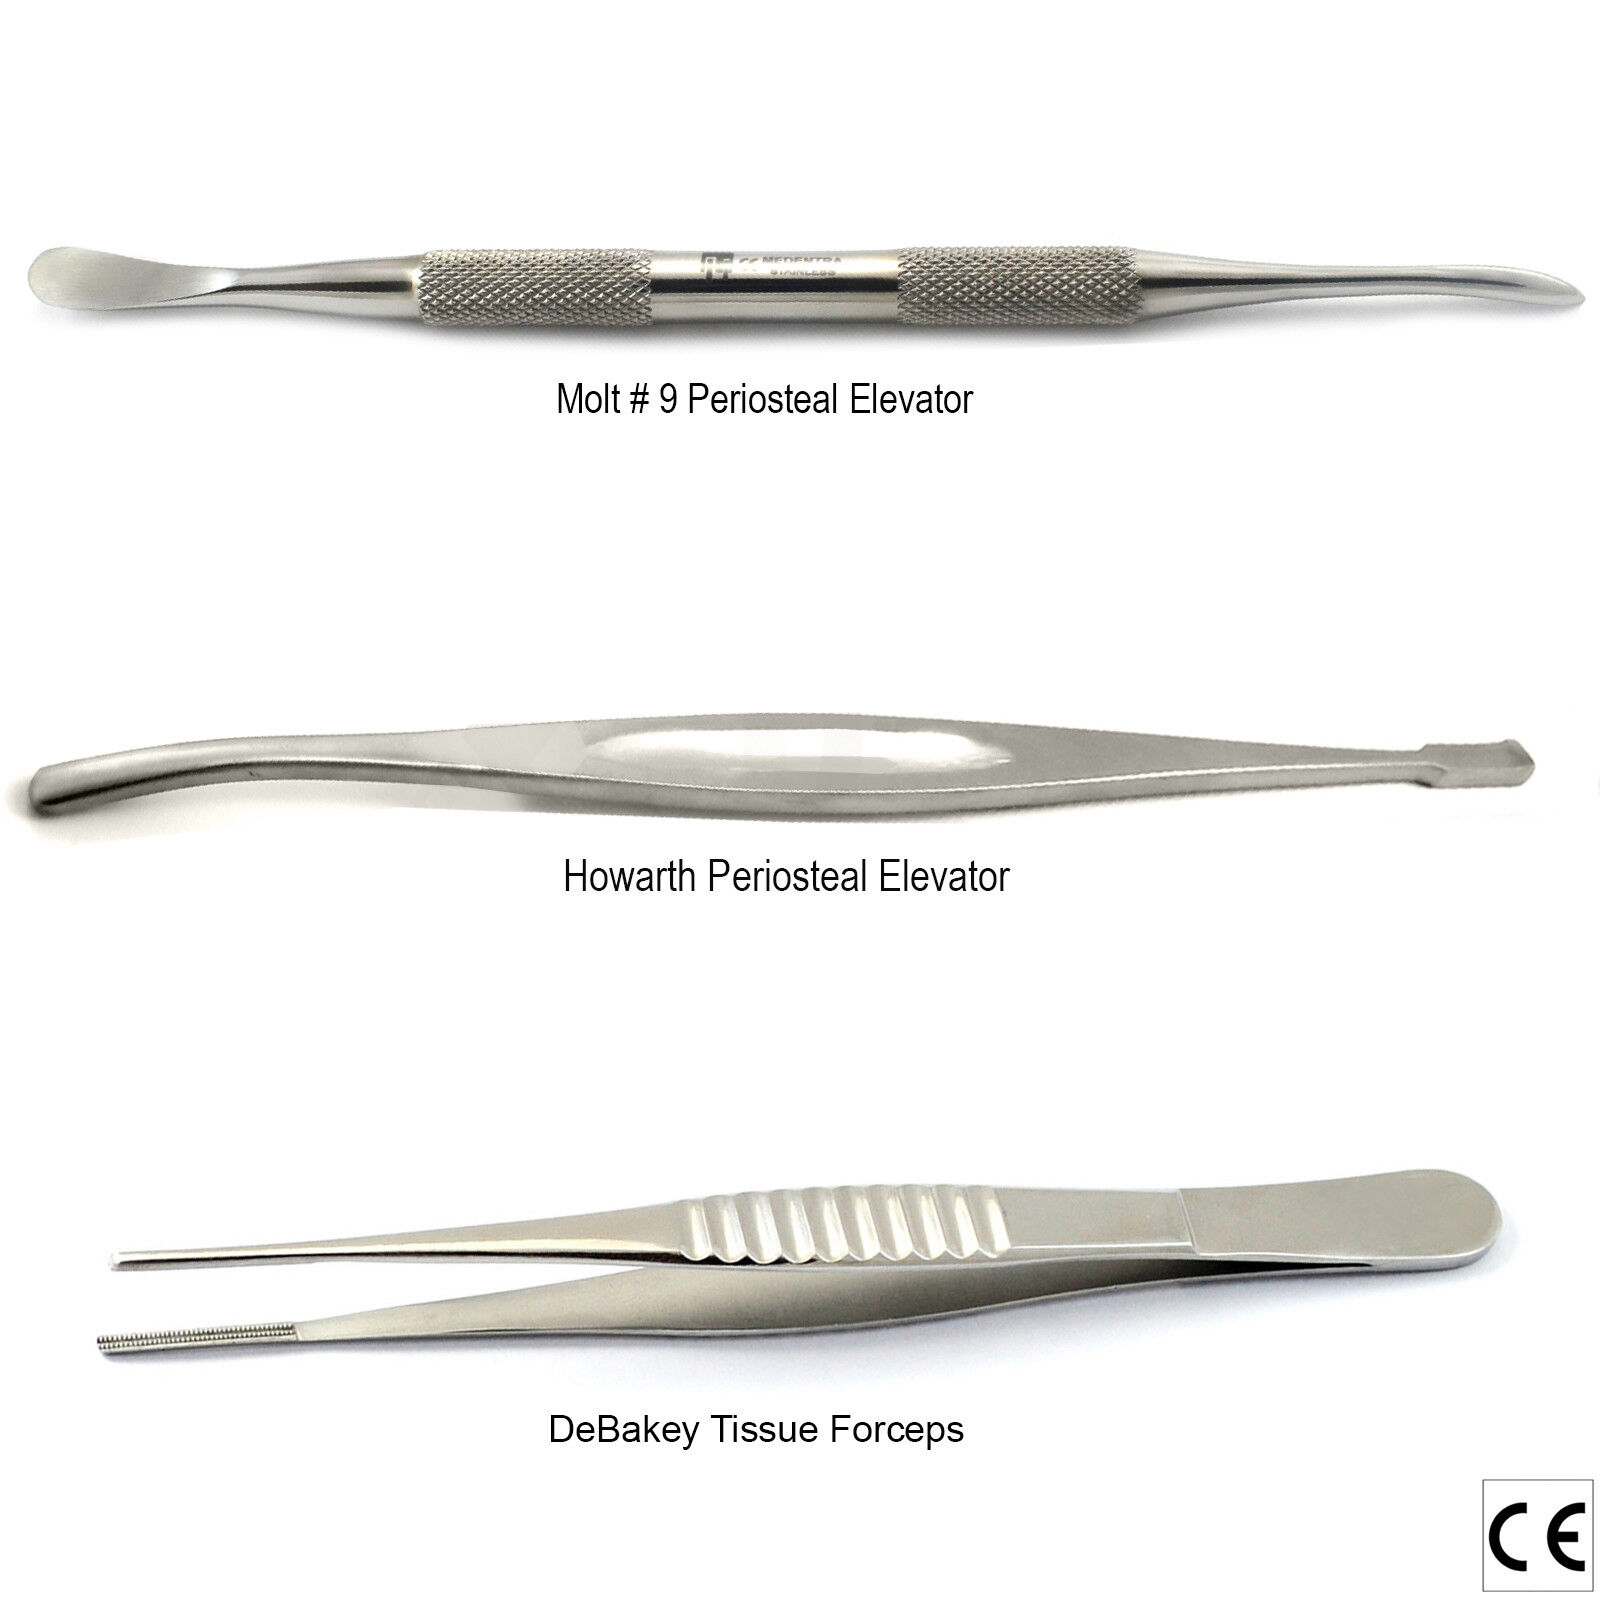 Elevator Howarth Implant Periosteal Molt 9 Debakey Tissue Forceps Set of 3 Labor